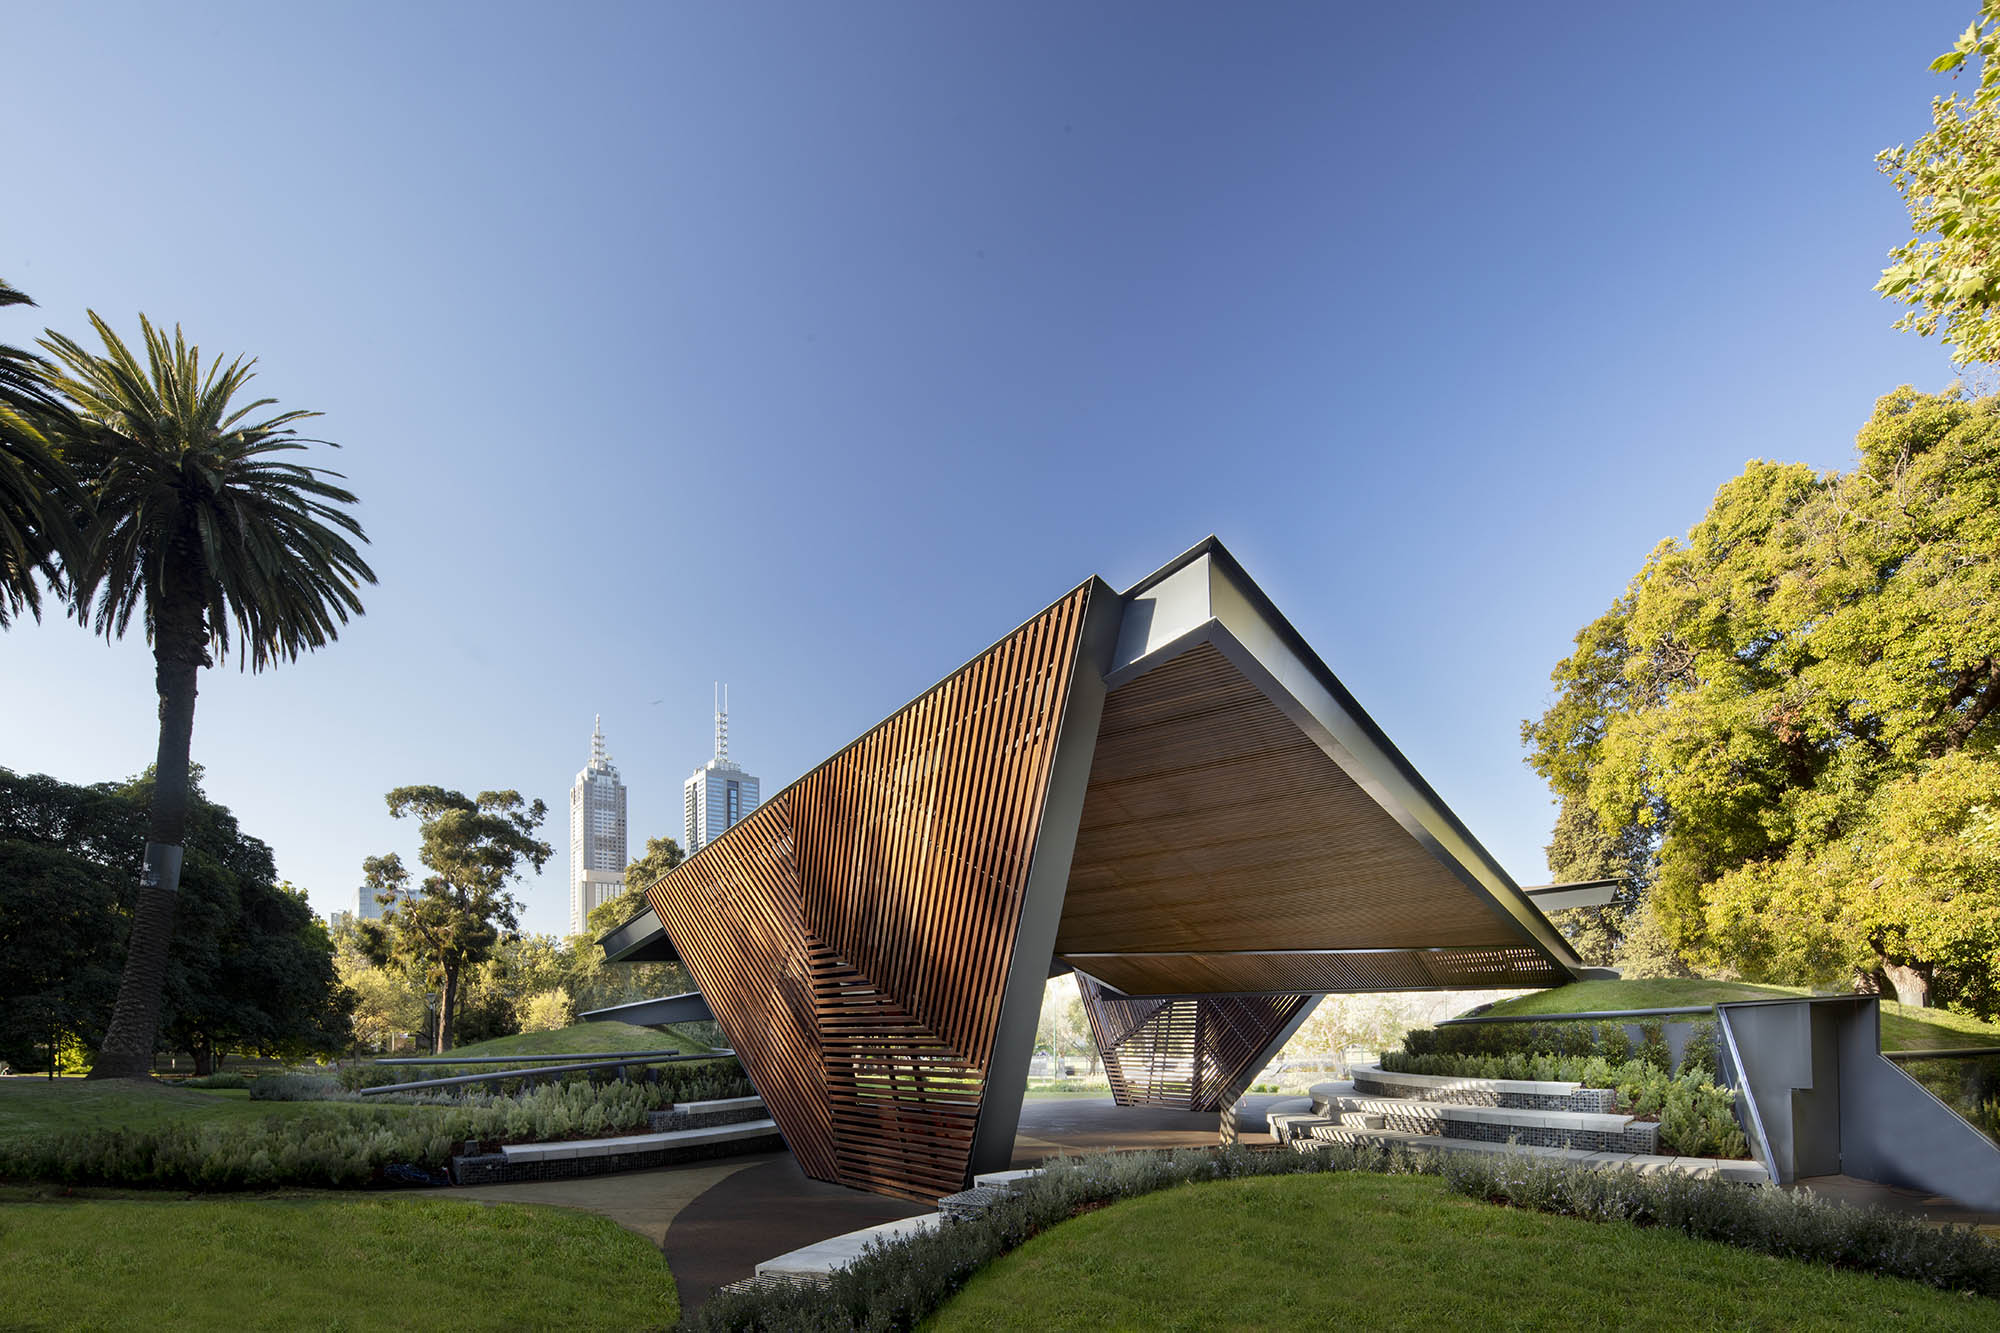 MPavilion 5 by Carme Pinós in its original site in 2015. It opened at Monash University’s Peninsula campus in March 2023. Photo by John Gollings, courtesy of MPavilion.